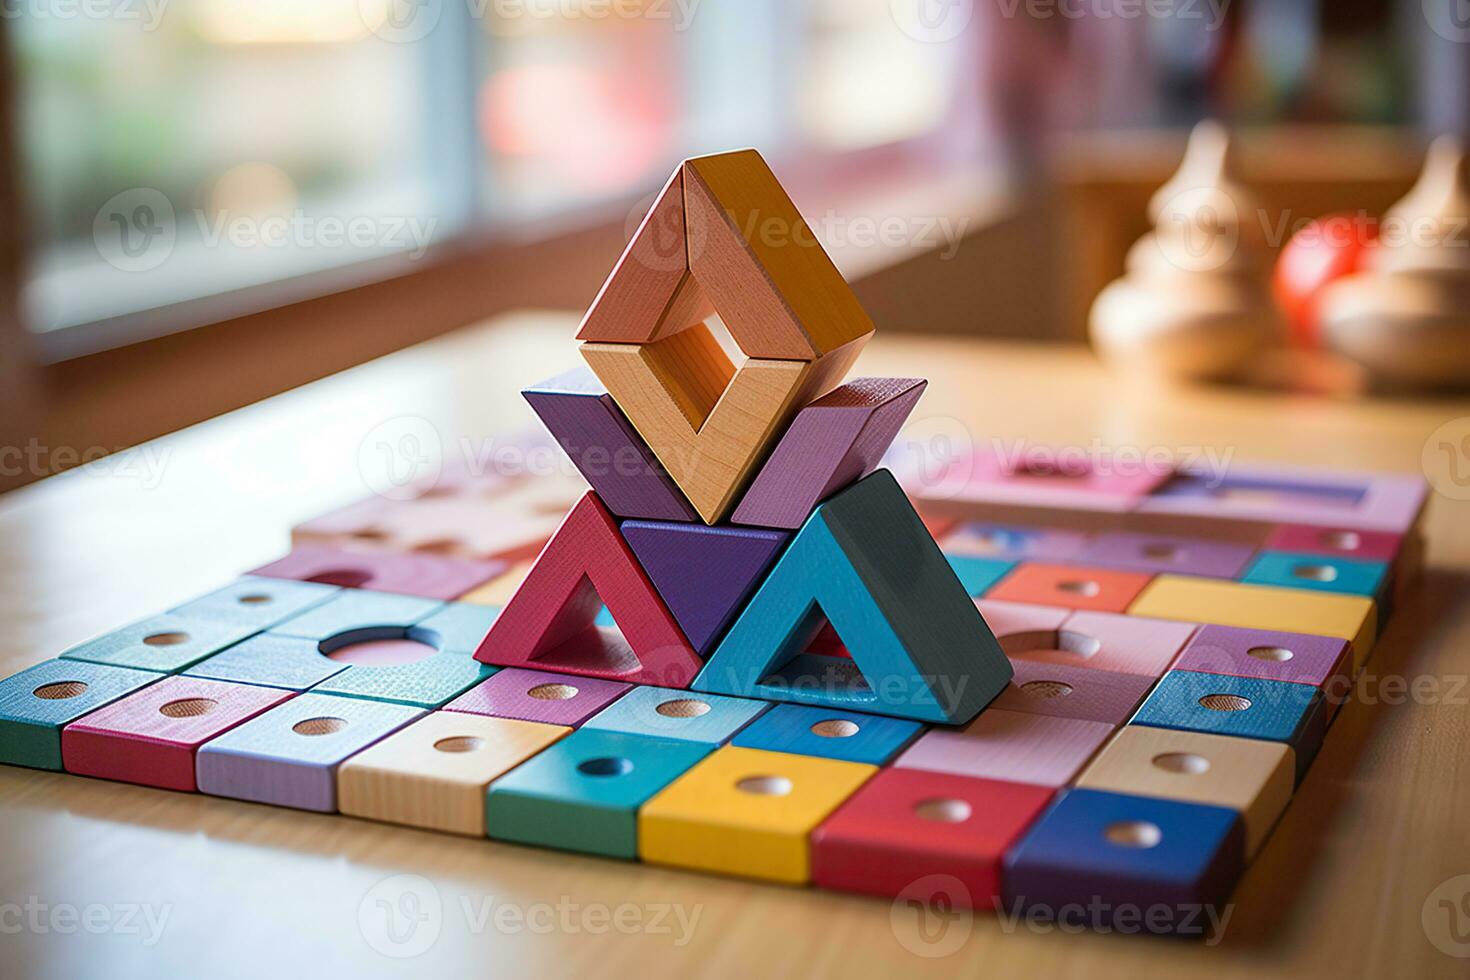 Colorful wooden toys. Wooden geometric shapes on a wooden table. Wooden play set. Generated by artificial intelligence photo